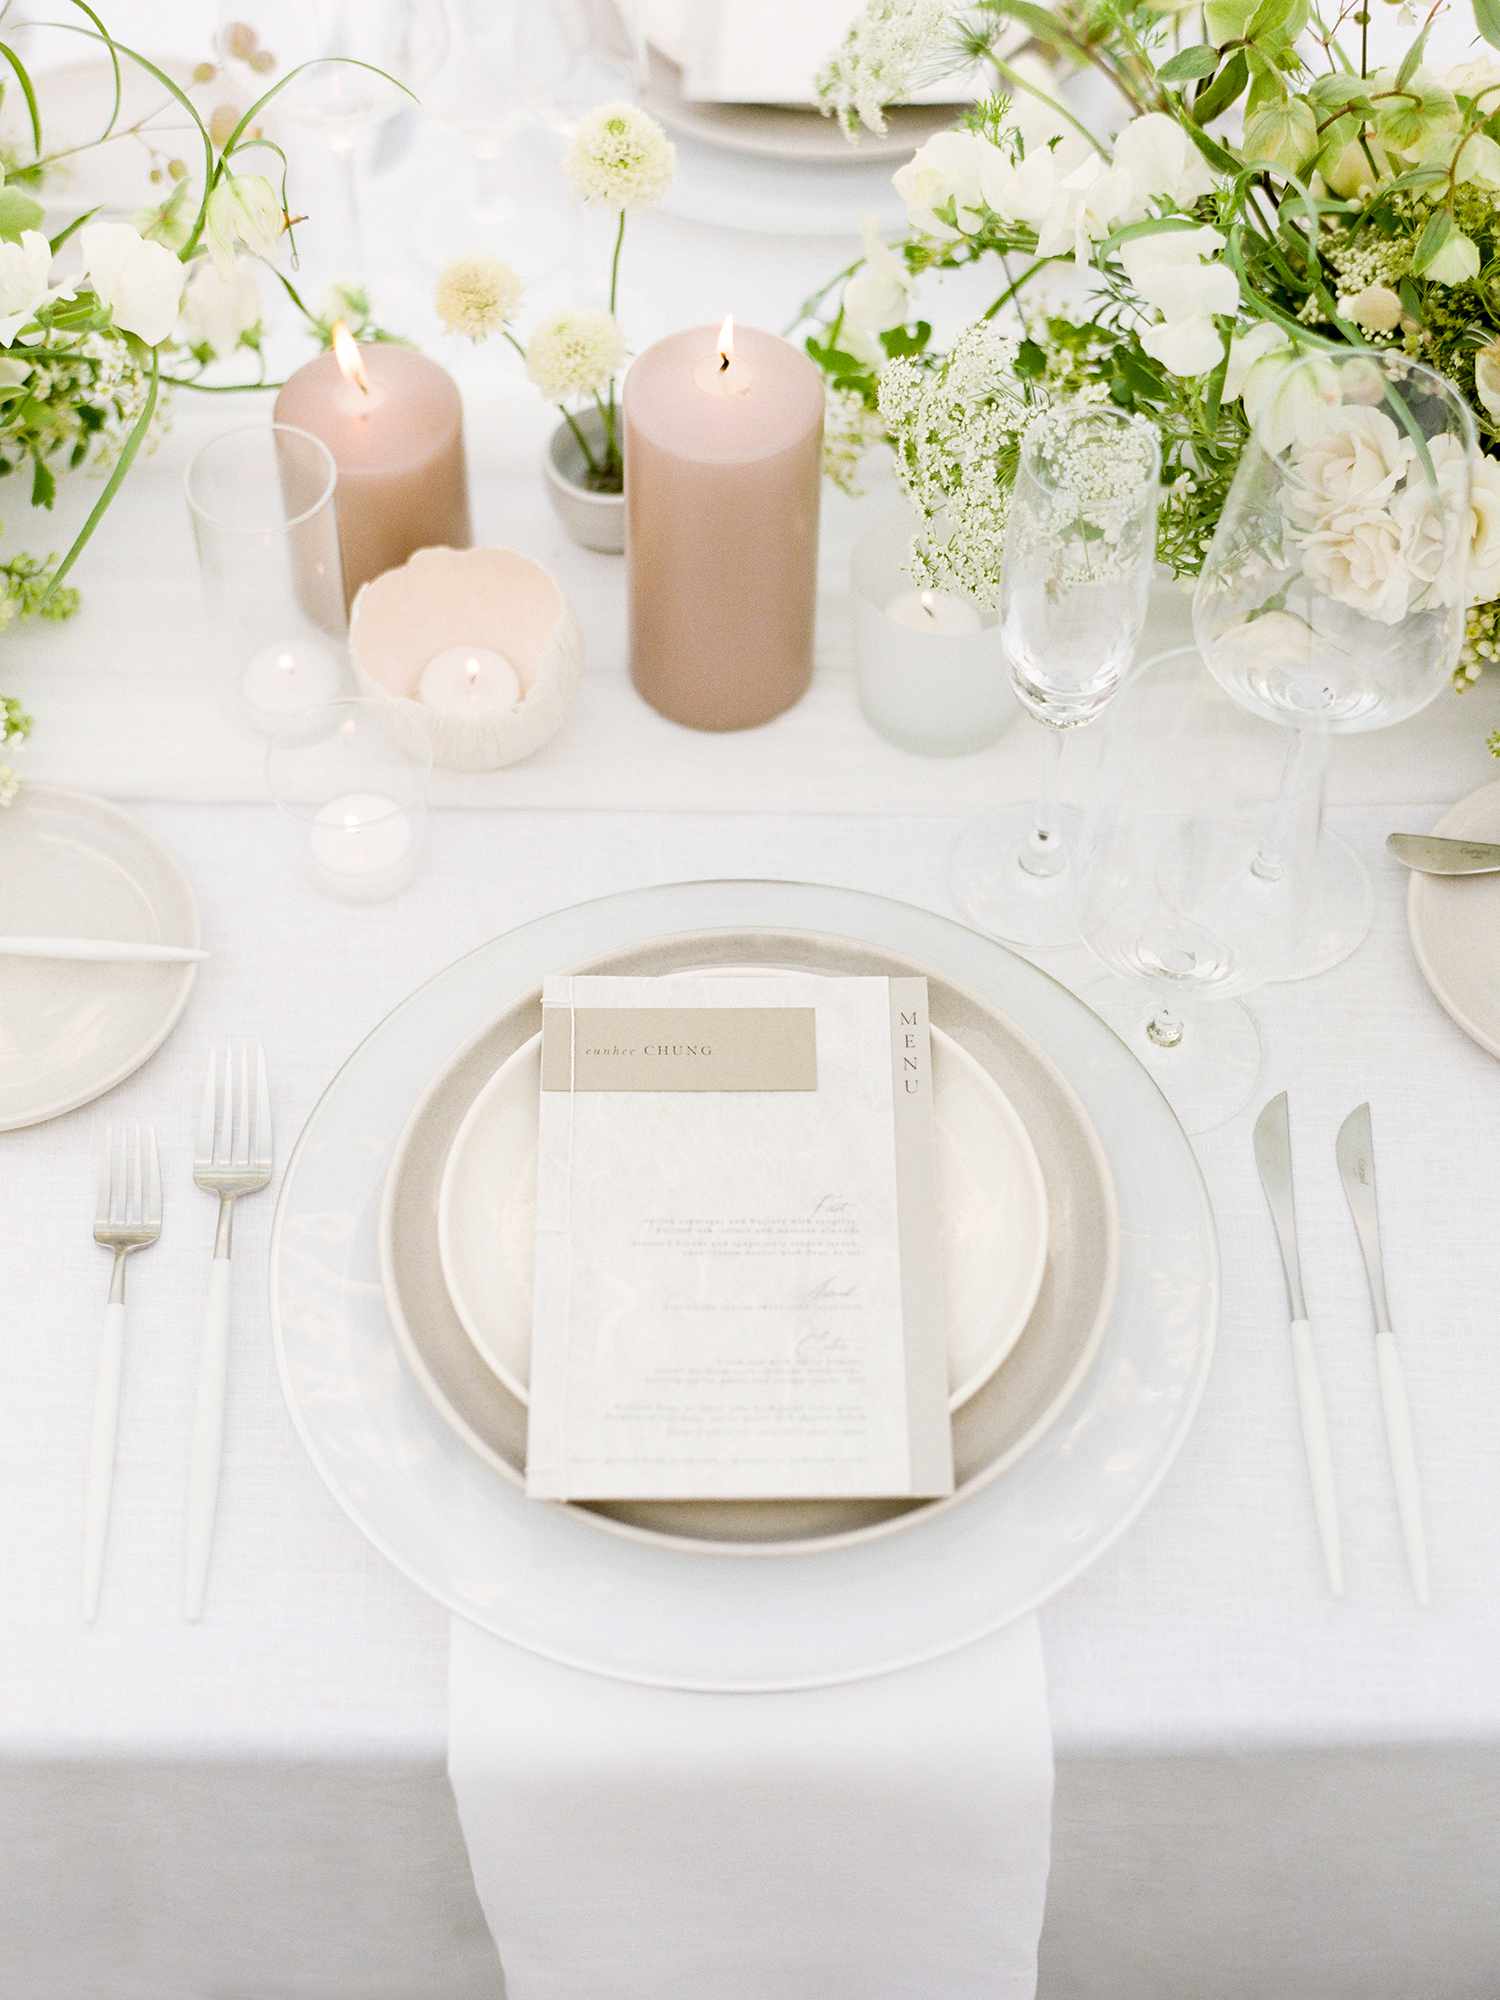 grace ceron wedding place setting and candles